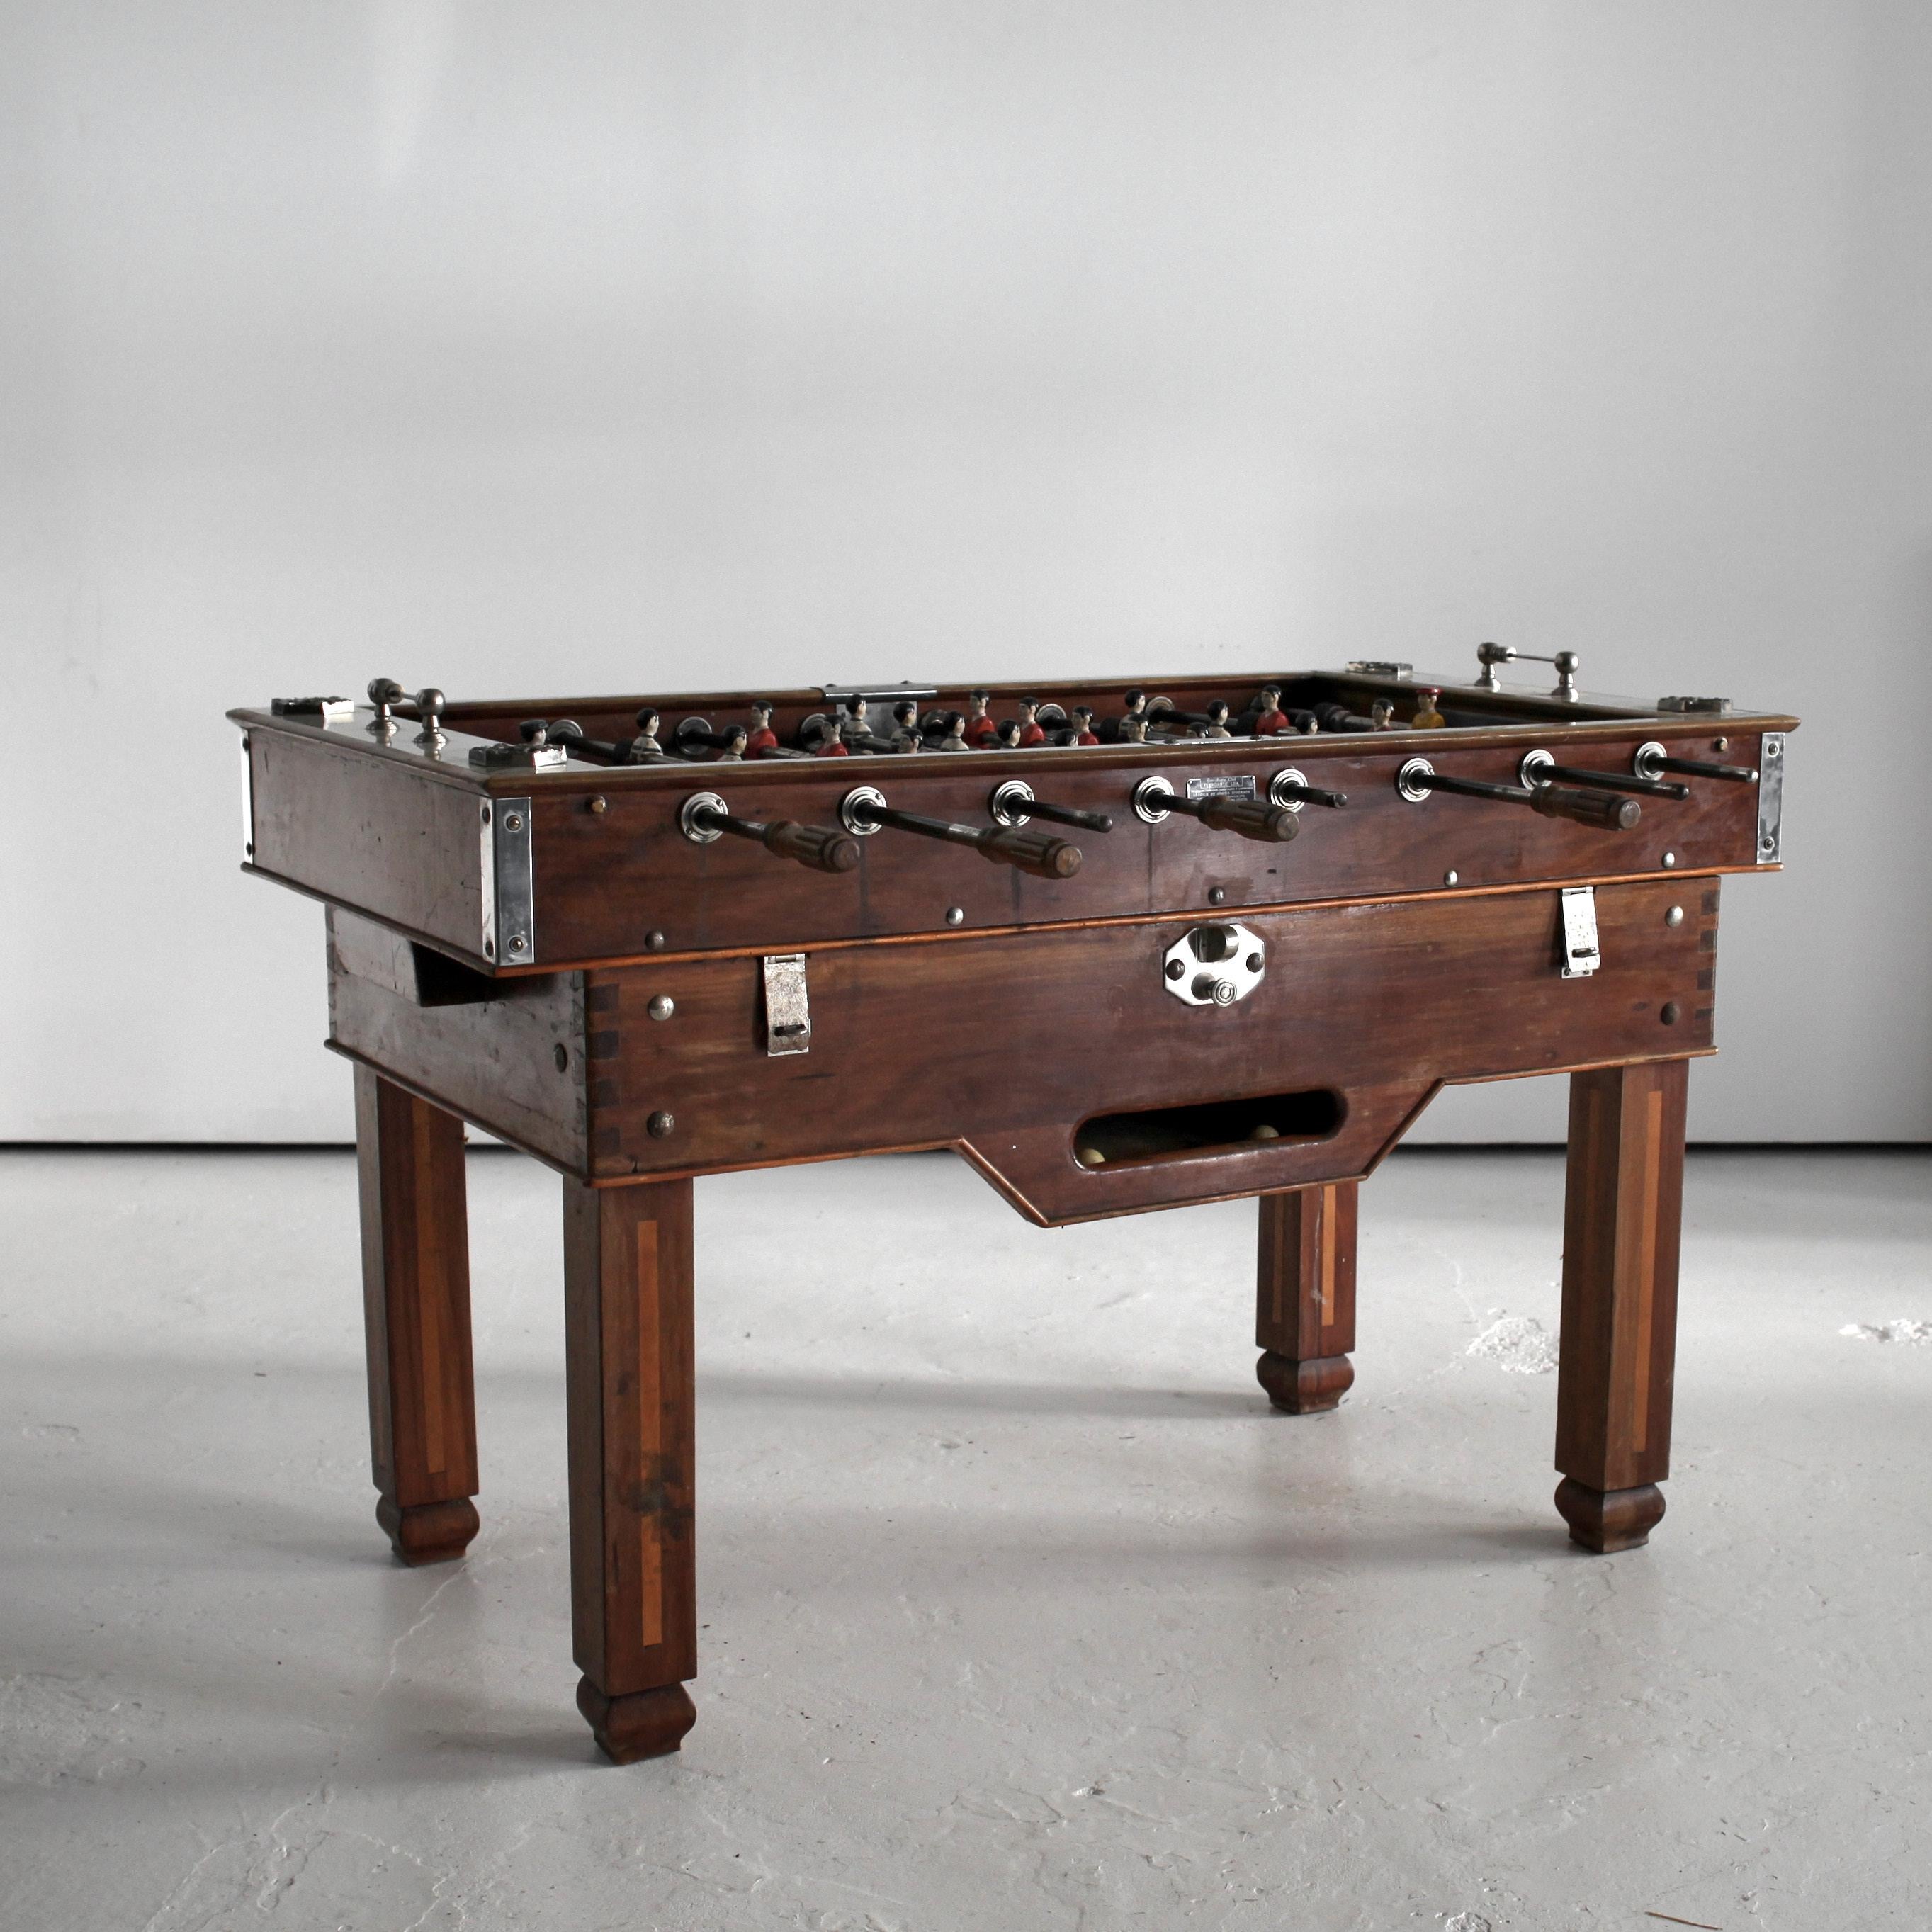 A C.1950s Portuguese football table representing one of the fiercest clashes in world football.. the 